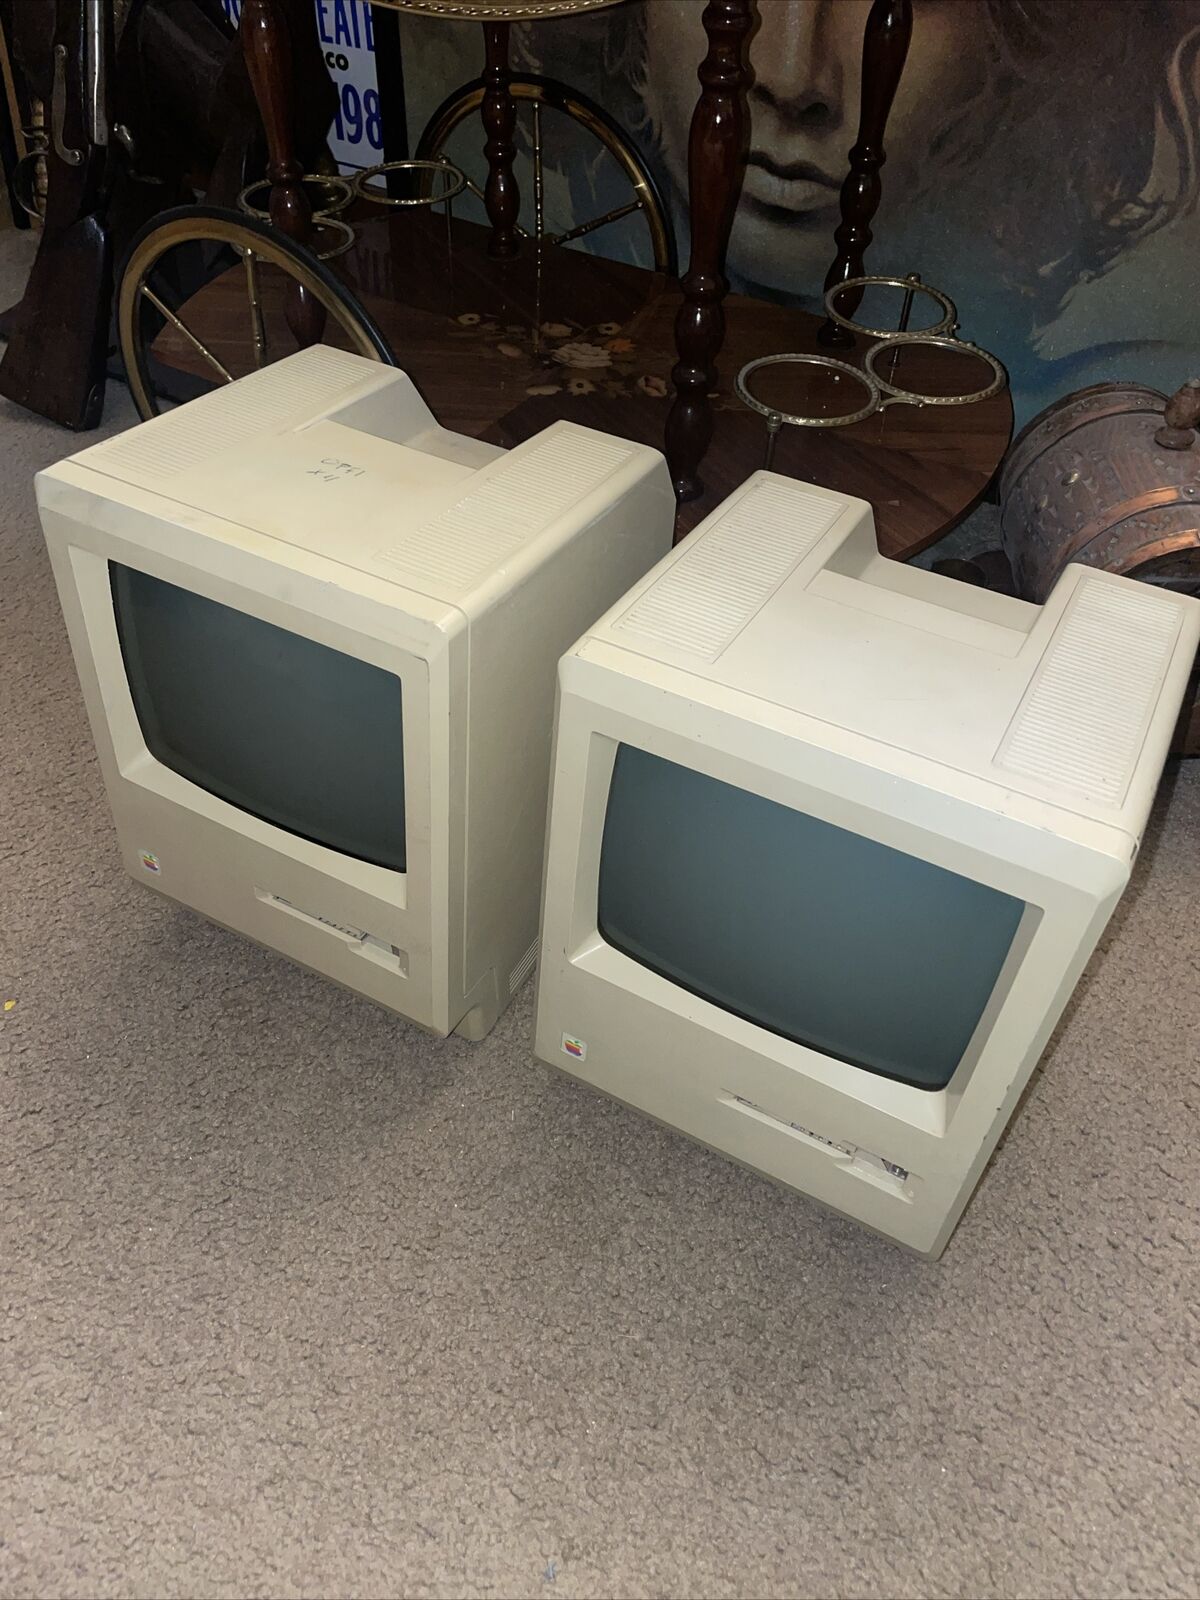 Lot Of Two Vintage Apple Macintosh Computers Models 128k M0001 For Parts